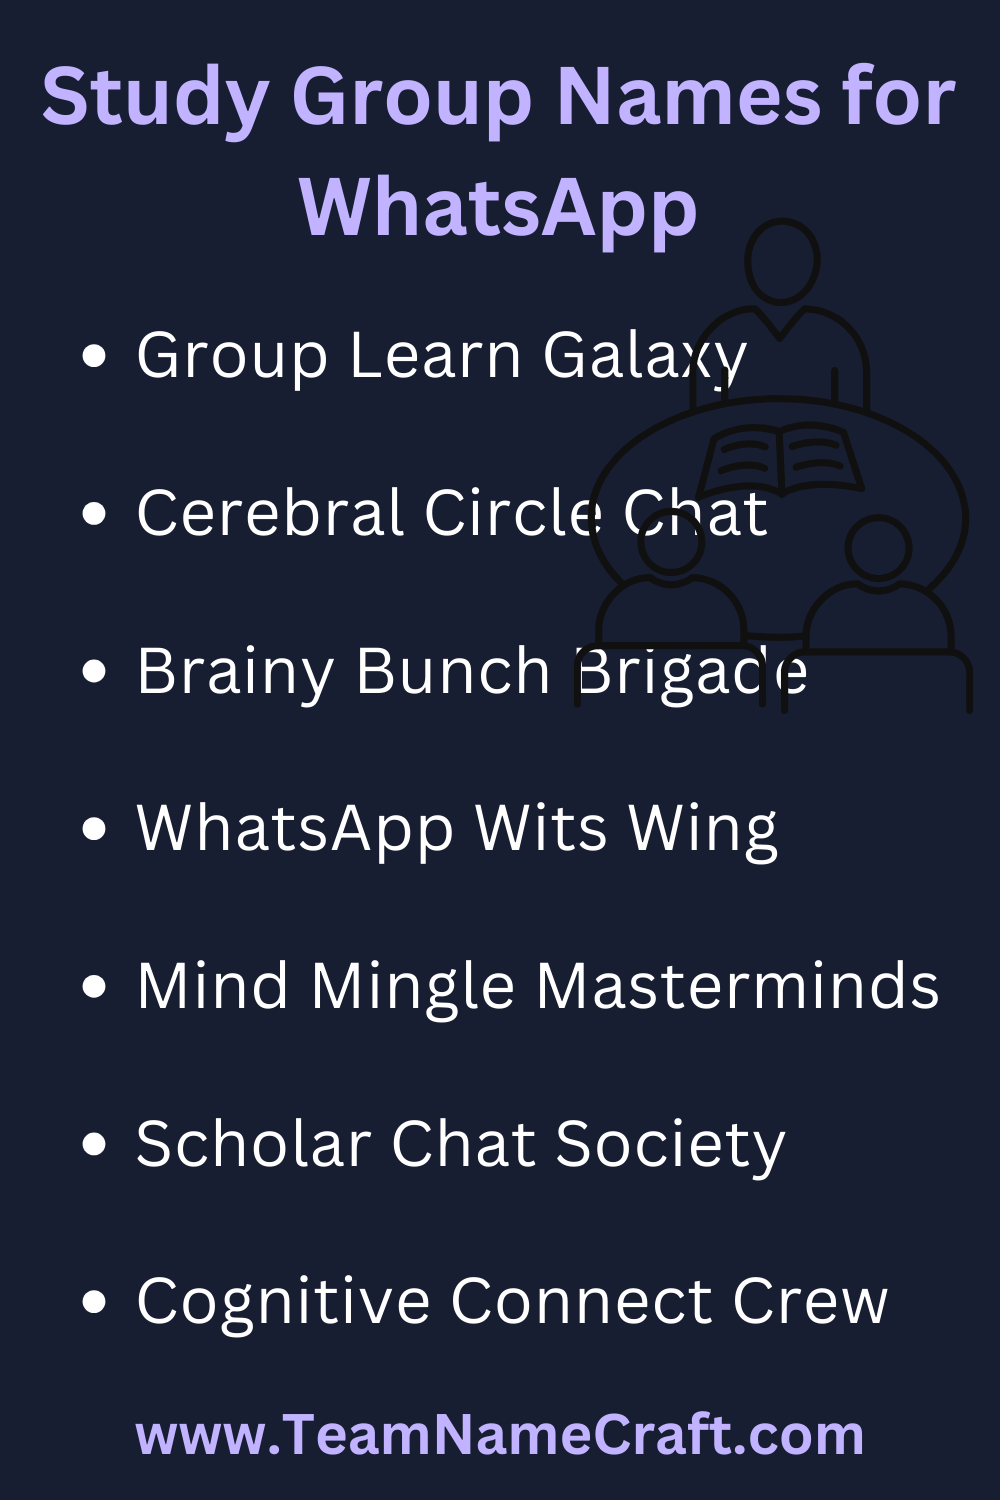 Study Group Names for WhatsApp